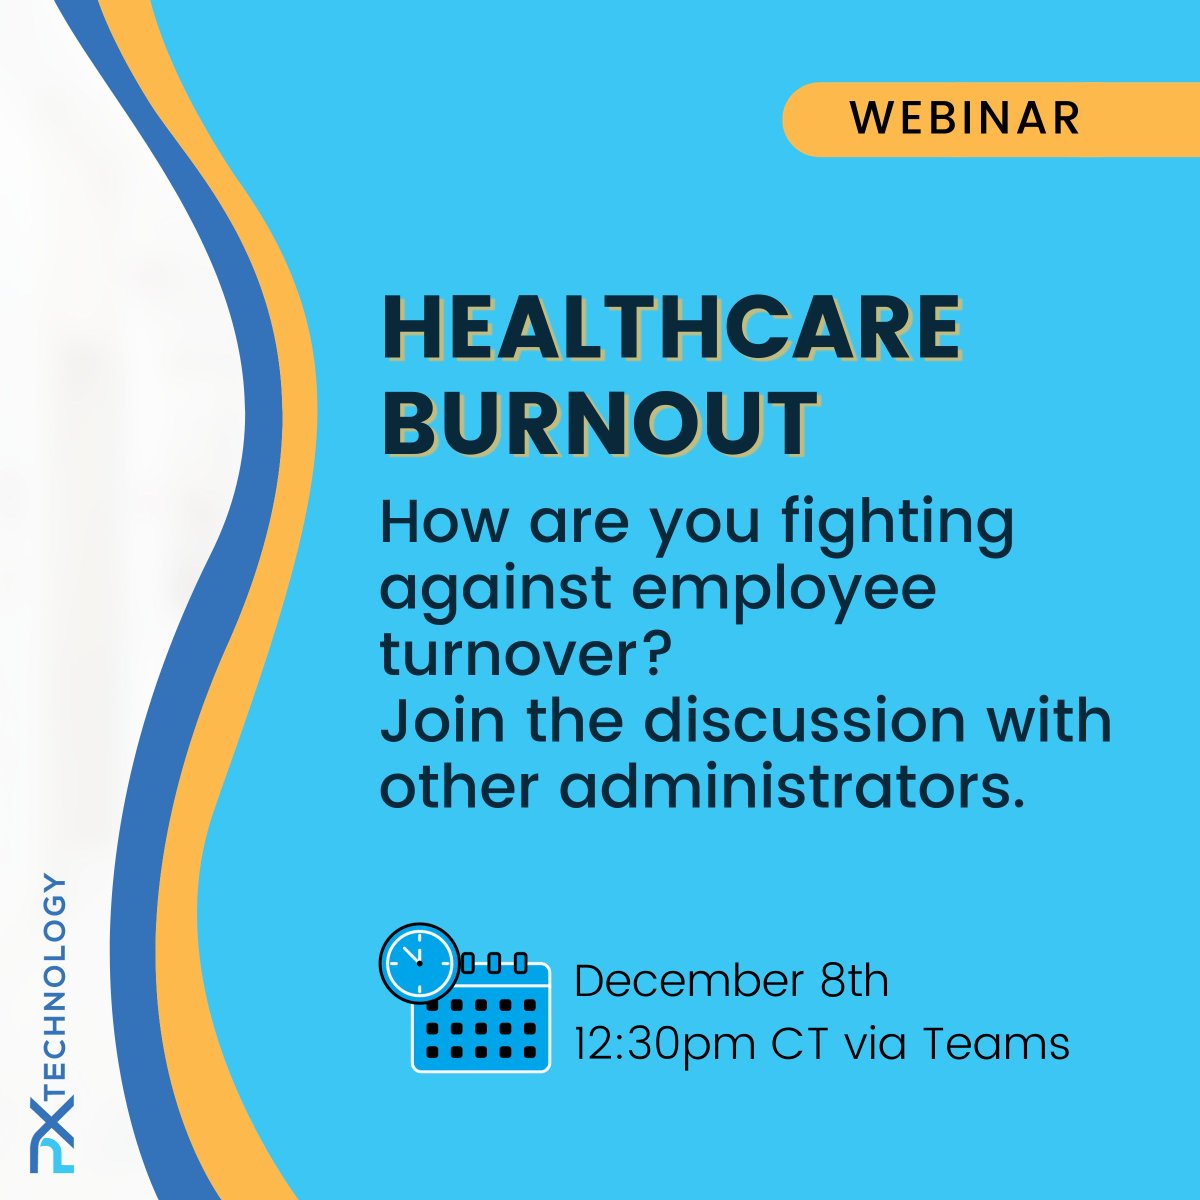 Are you tired of fighting employee turnover on your own? Are you looking for ideas on how to boost team morale in your medical practice? Join the conversation this Friday! Attendance is limited, use the following event link to register: lnkd.in/gprcrq6G